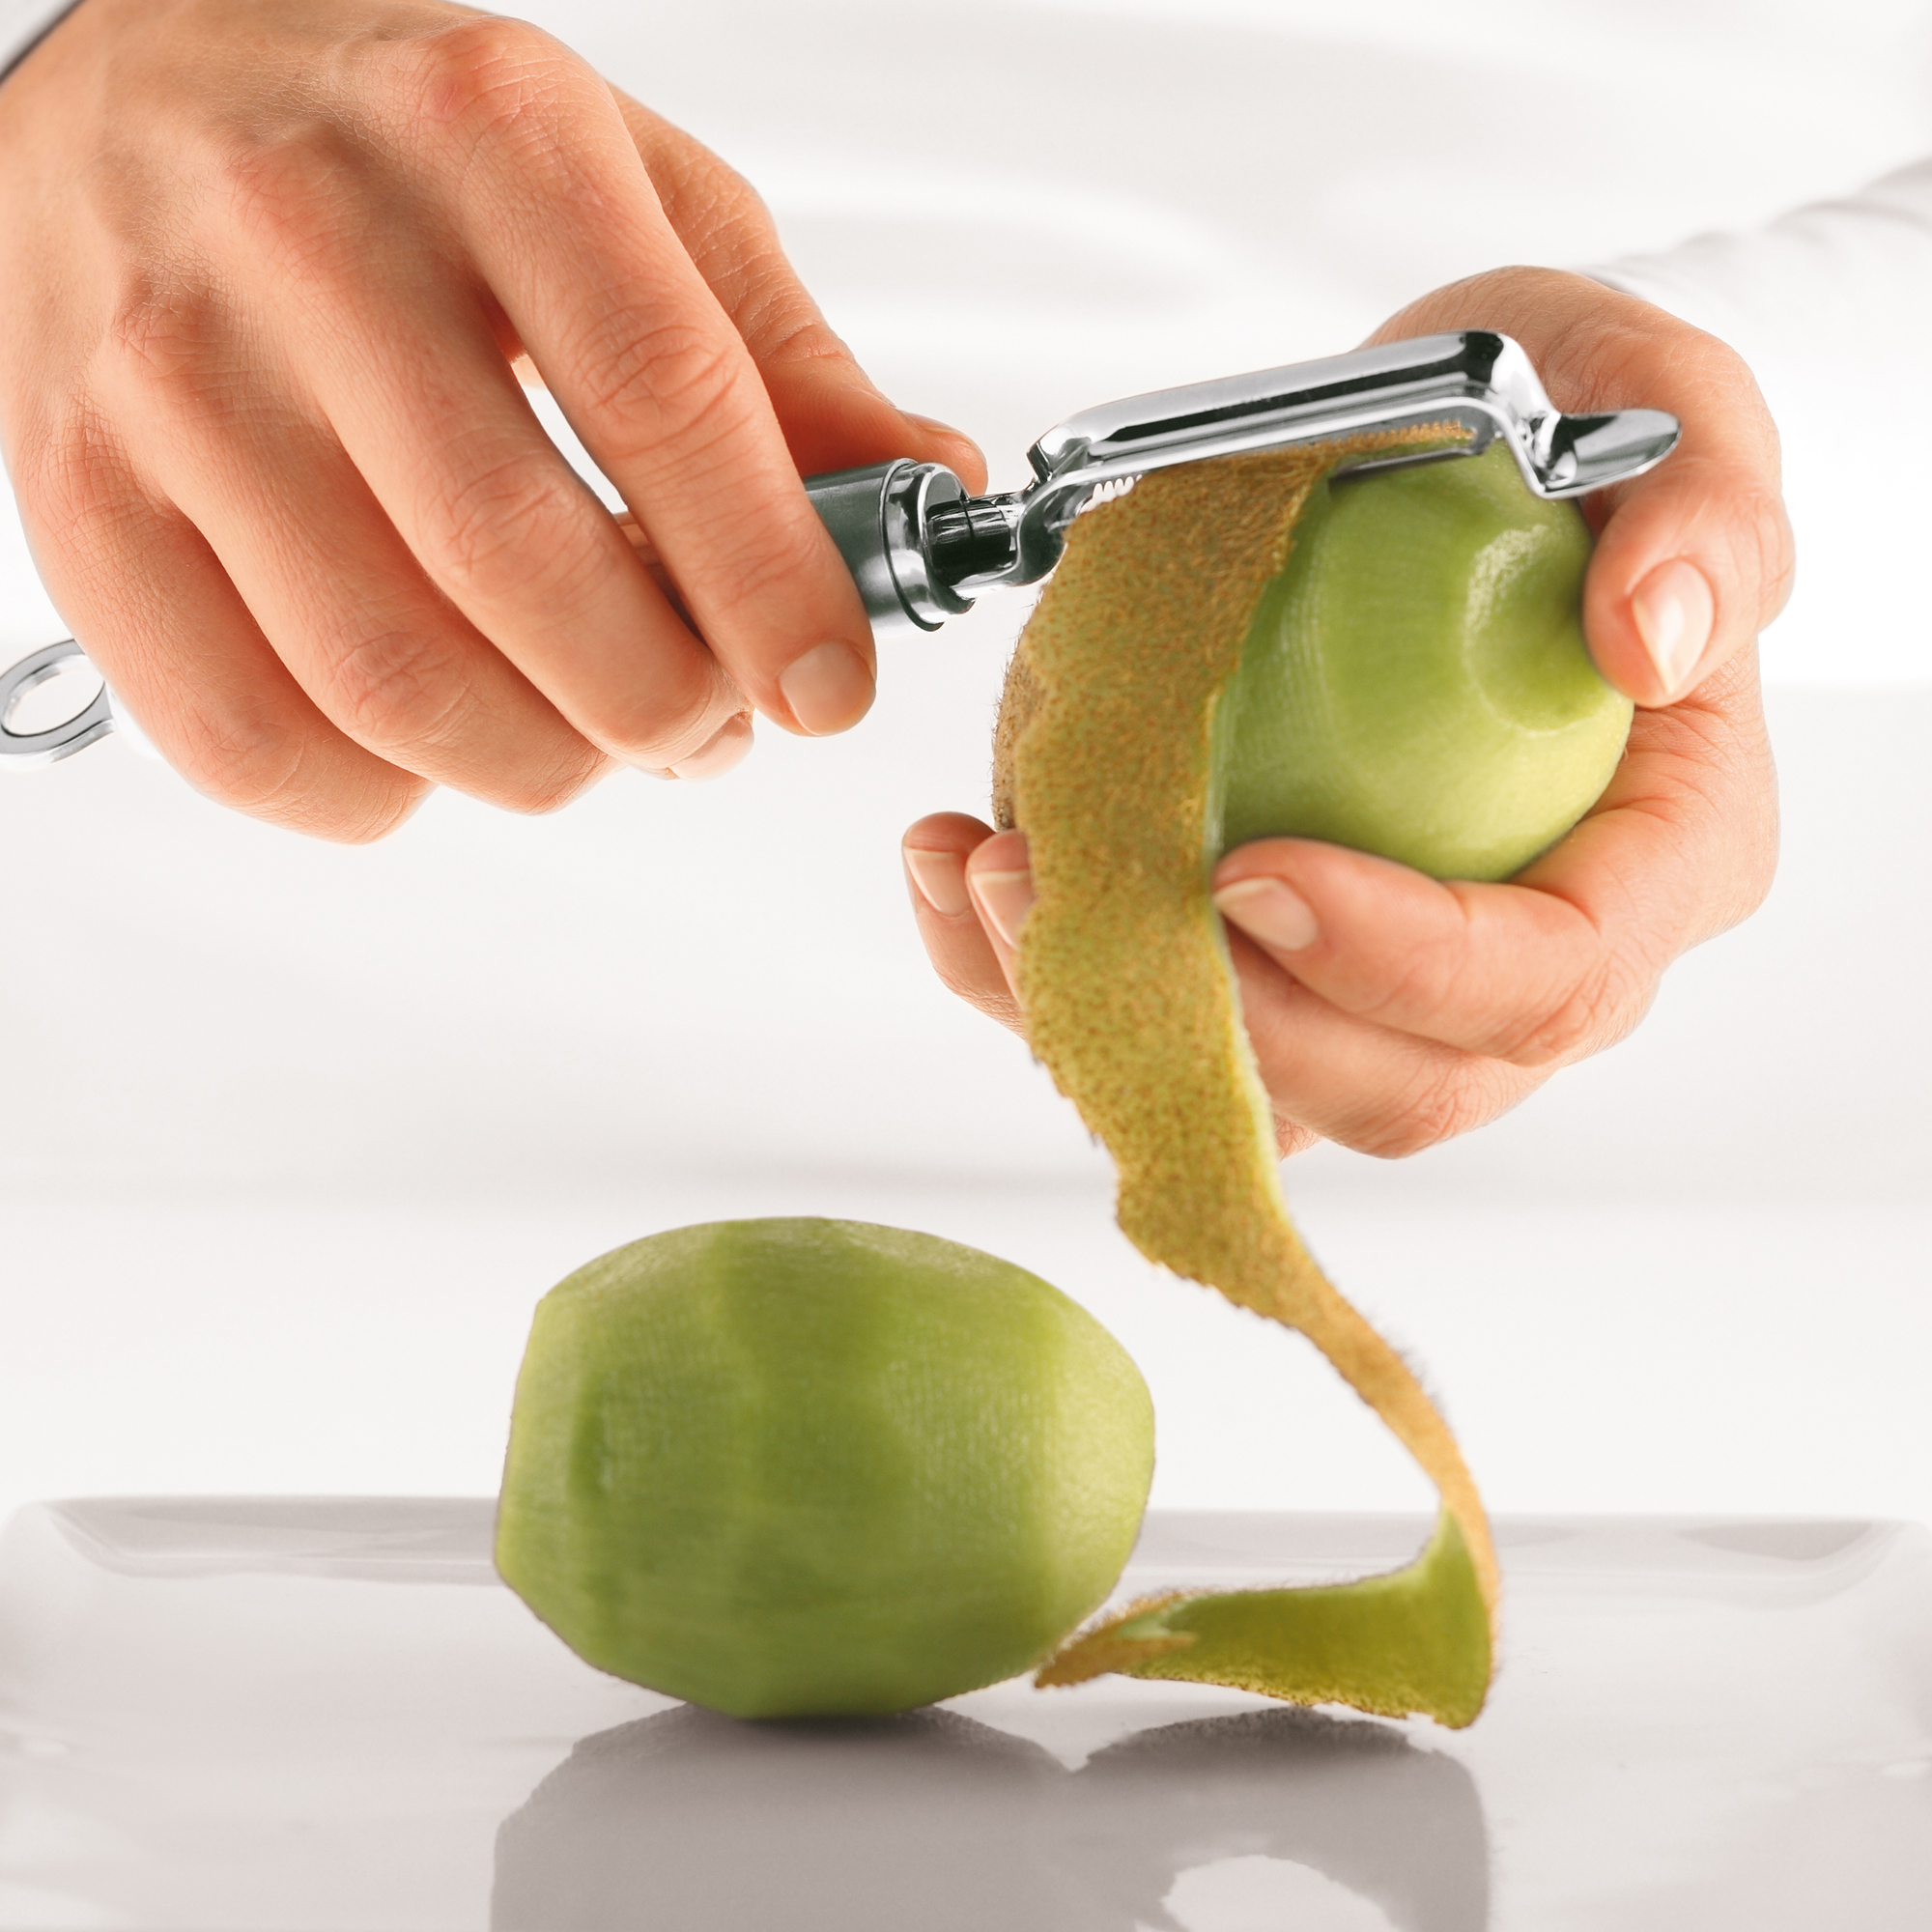 Right Products Creative Kiwi Cutter Vegetable Slicer Fruit Peeler